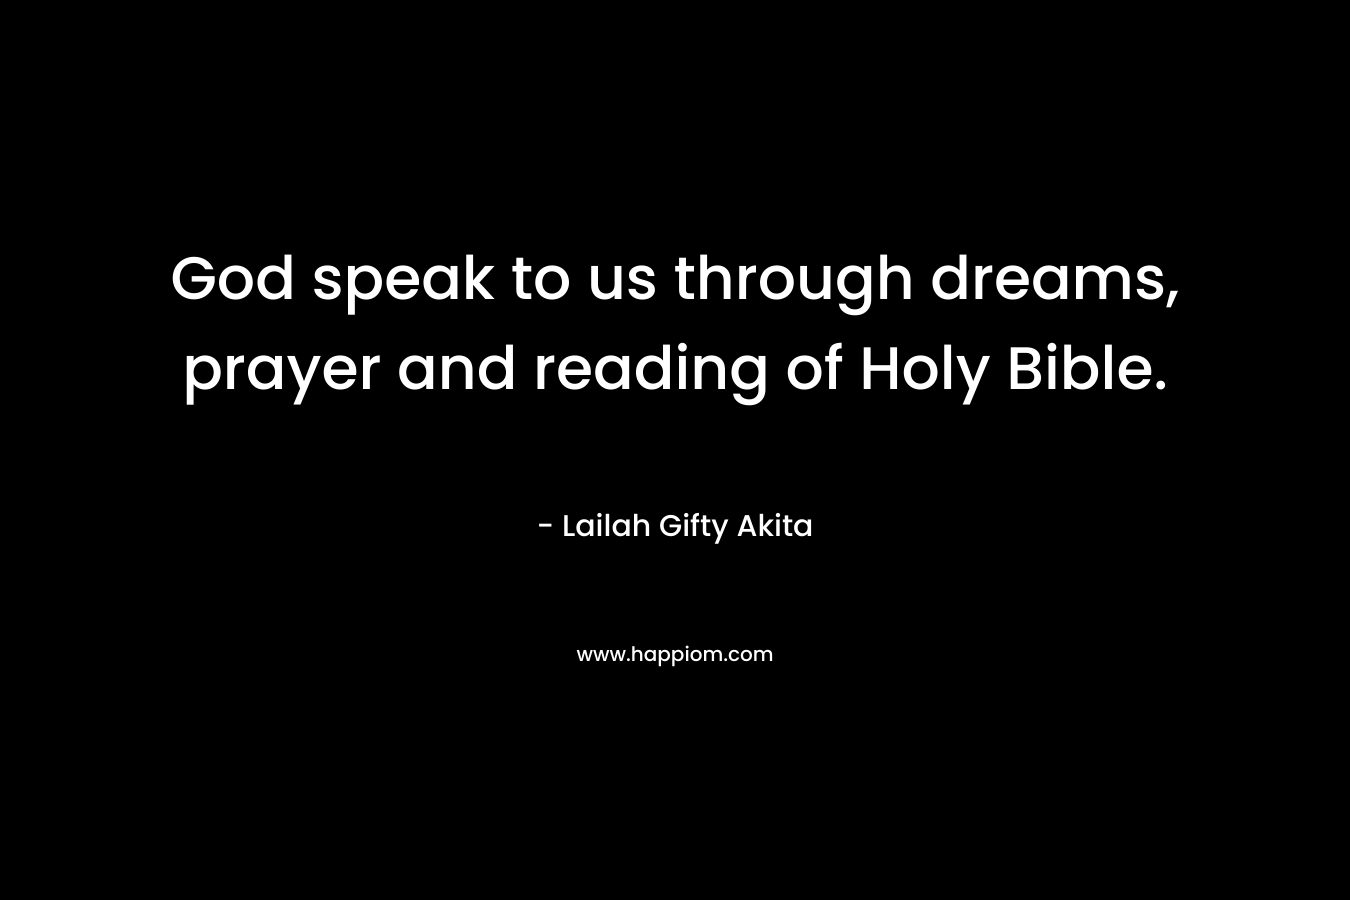 God speak to us through dreams, prayer and reading of Holy Bible.